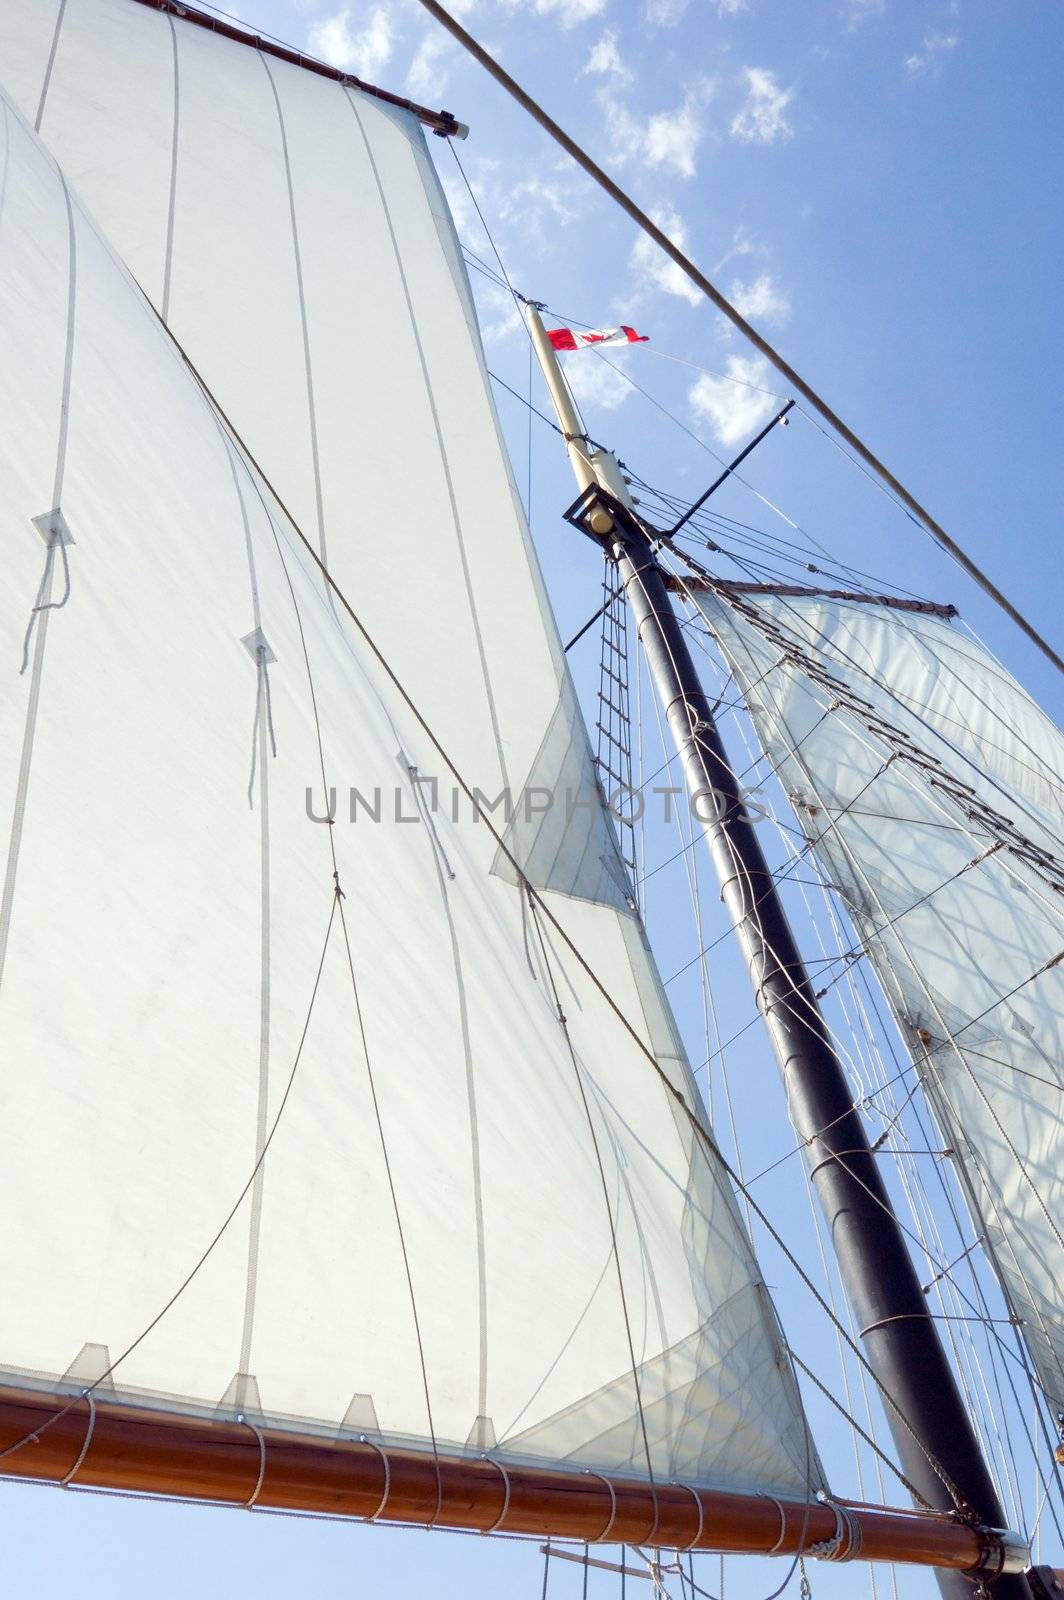 Big sails and masts on blue sky background